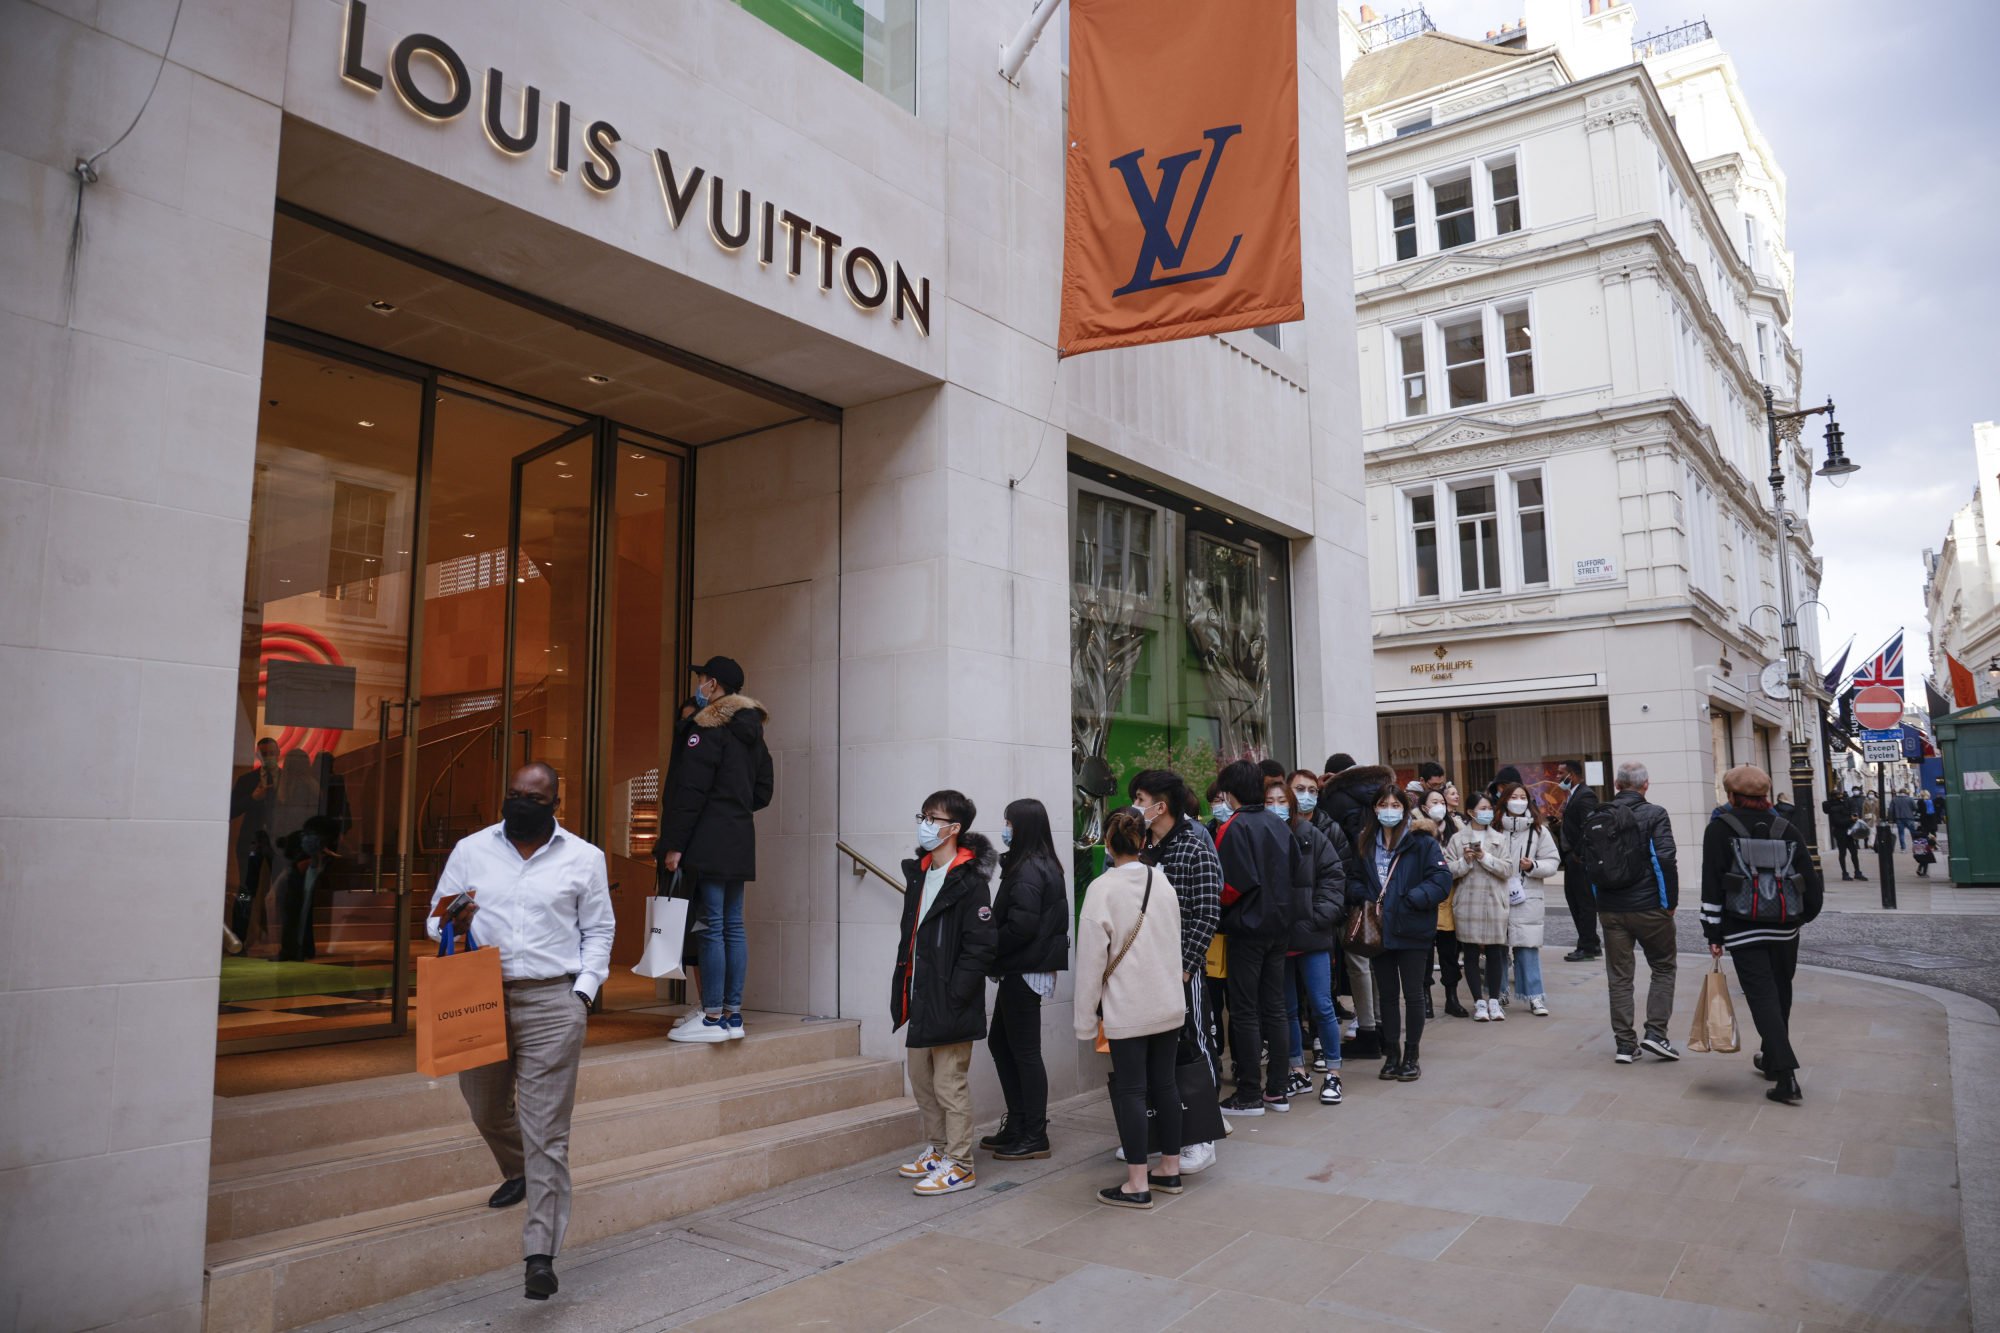 Louis Vuitton Owner LVMH To Use Blockchain To Track Luxury Goods